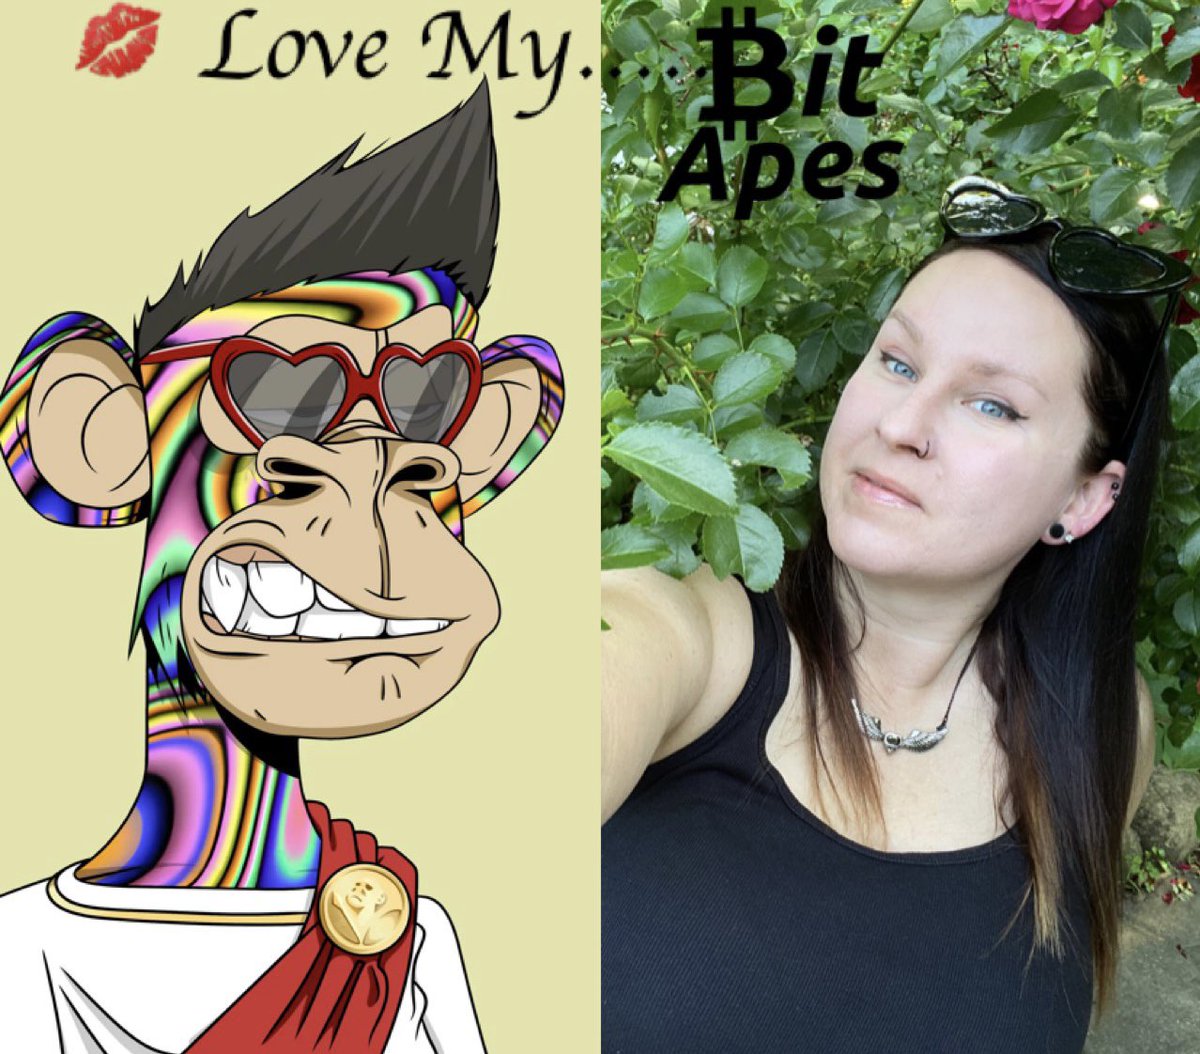 ❤️ My @BitApes Family!!! 🎶 Bit Apes all Day!!!!…We going on a Trip!!! 💋 If you’re not part of Bit Apes- What are you doin?? #BitApesFamily #BitApes #LoveMyApe #Ordinals #bitcoin #GoingToMars #Trippy #LFG